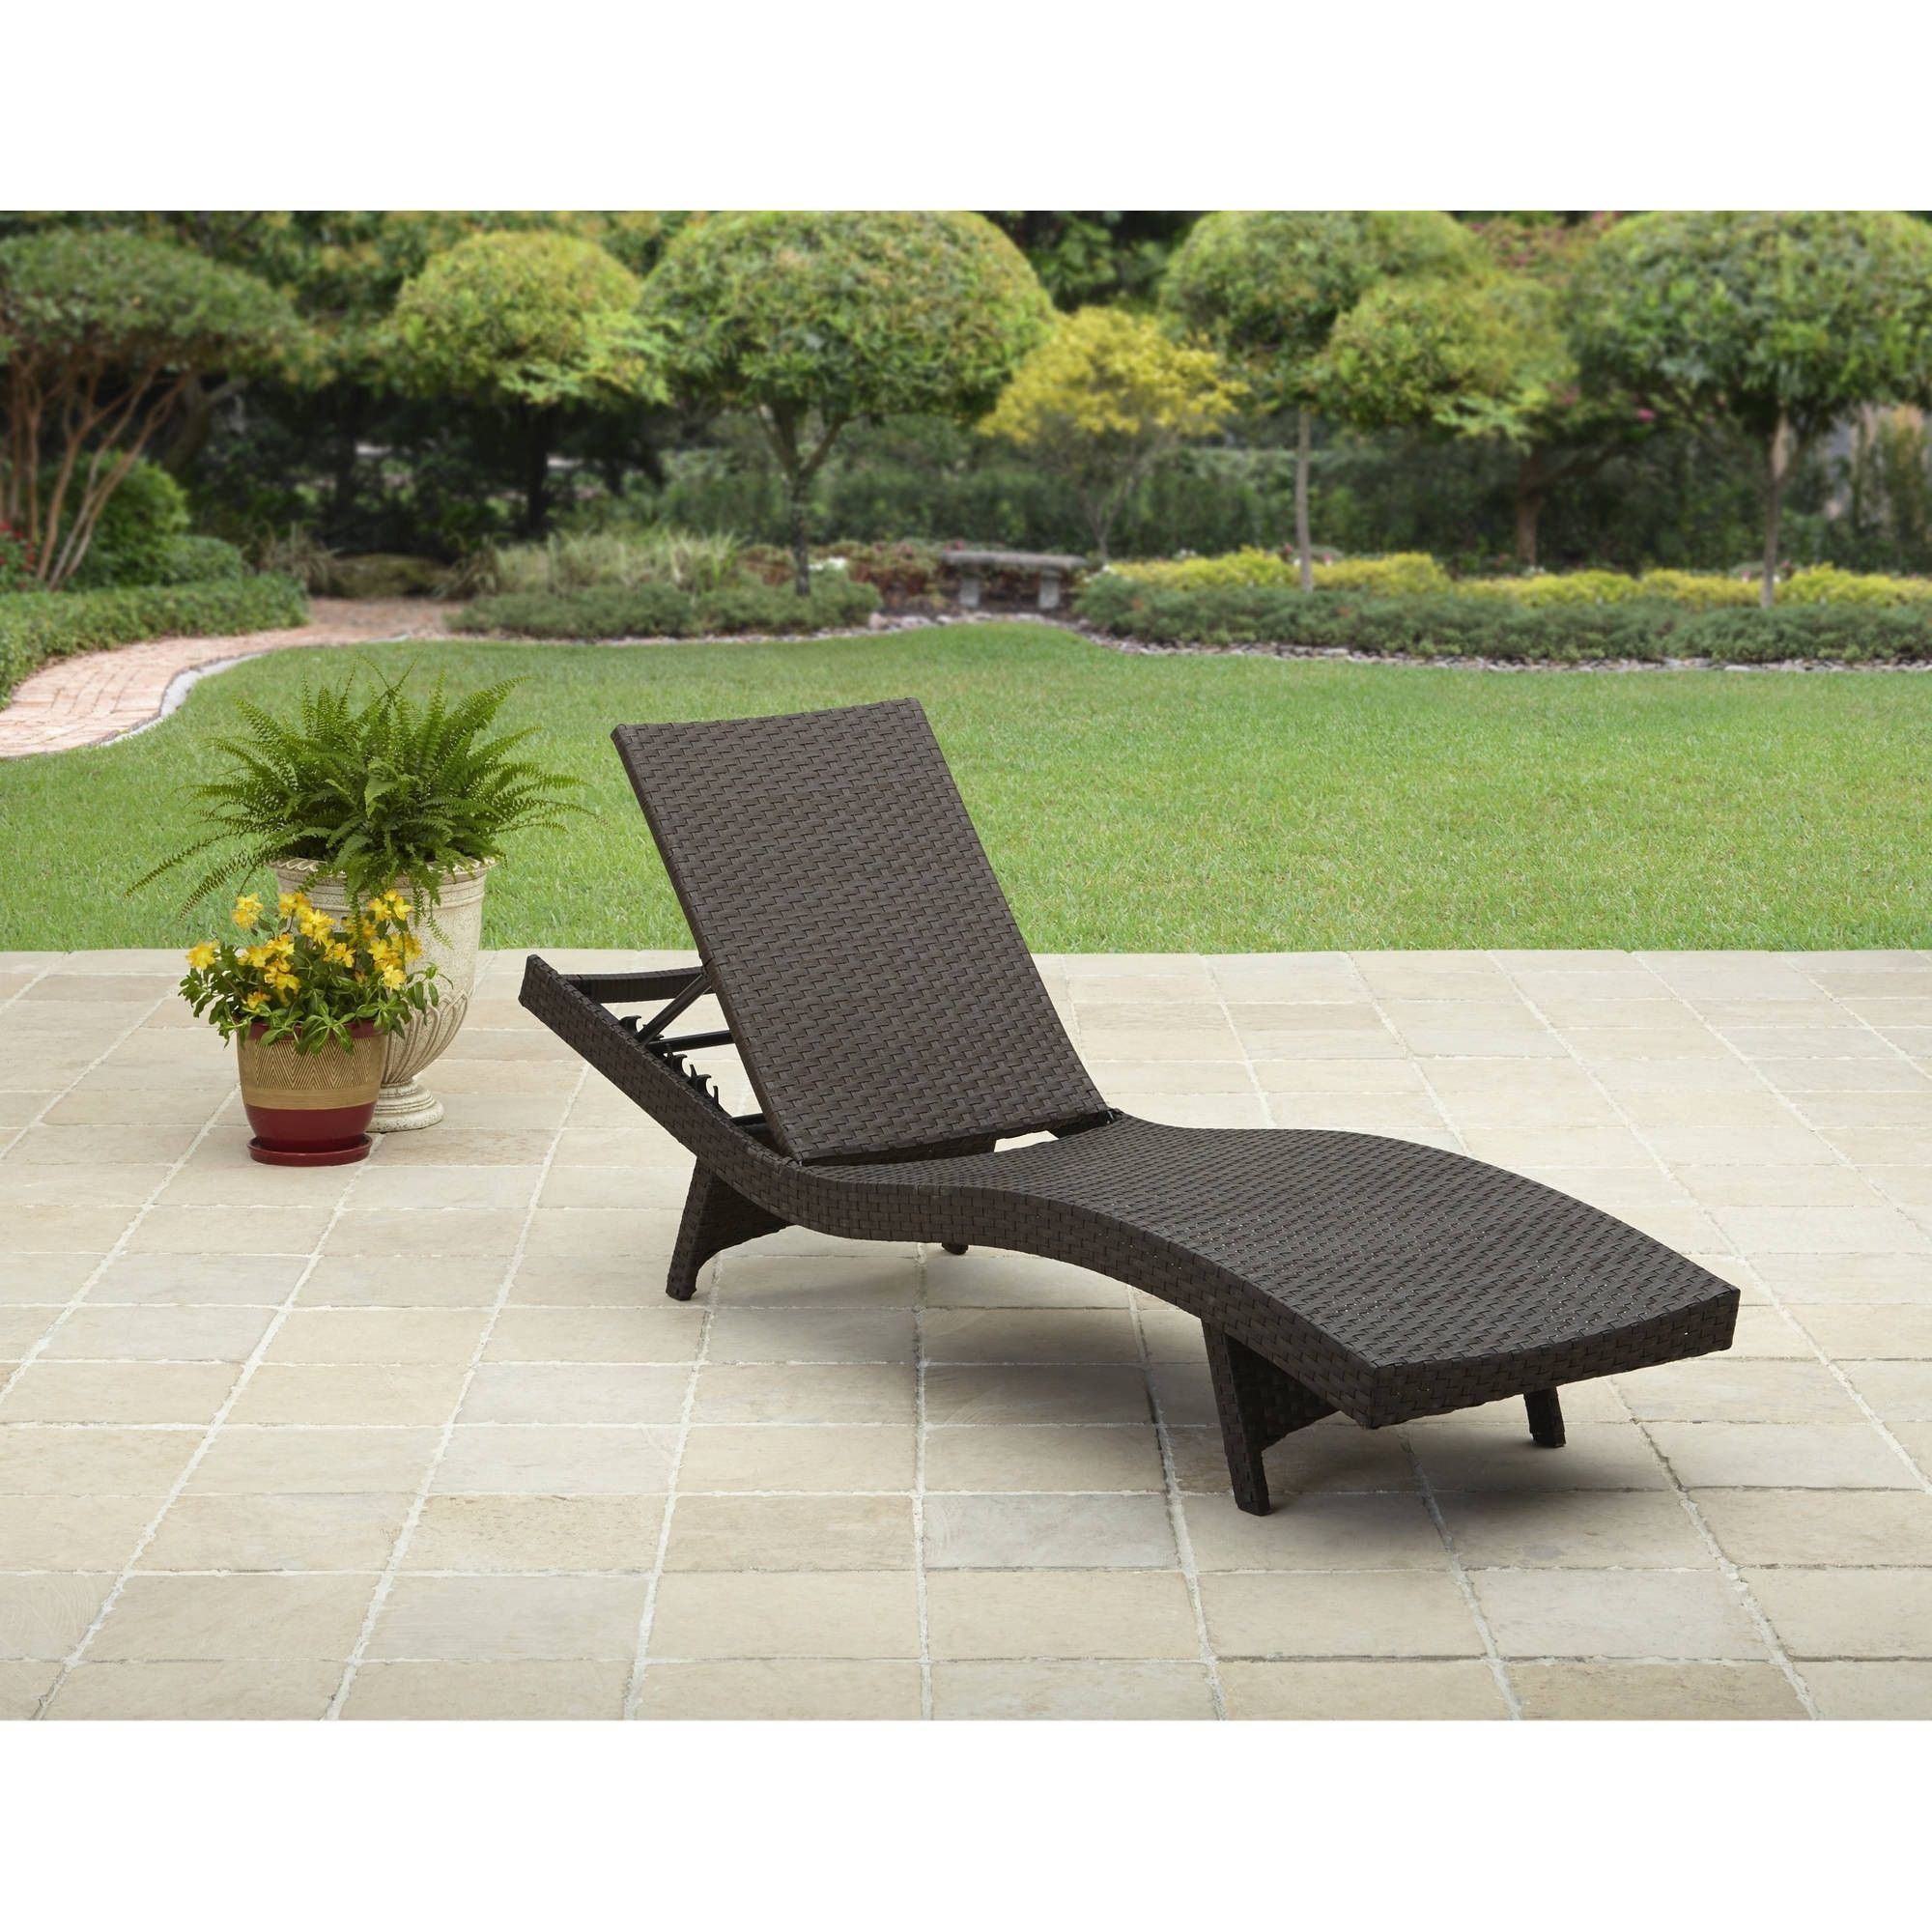 Newest Convertible Chair : Outdoor Chaise Lounge Chairs Clearance Outdoor With Regard To Green Resin Chaise Lounge Chairs (View 15 of 15)